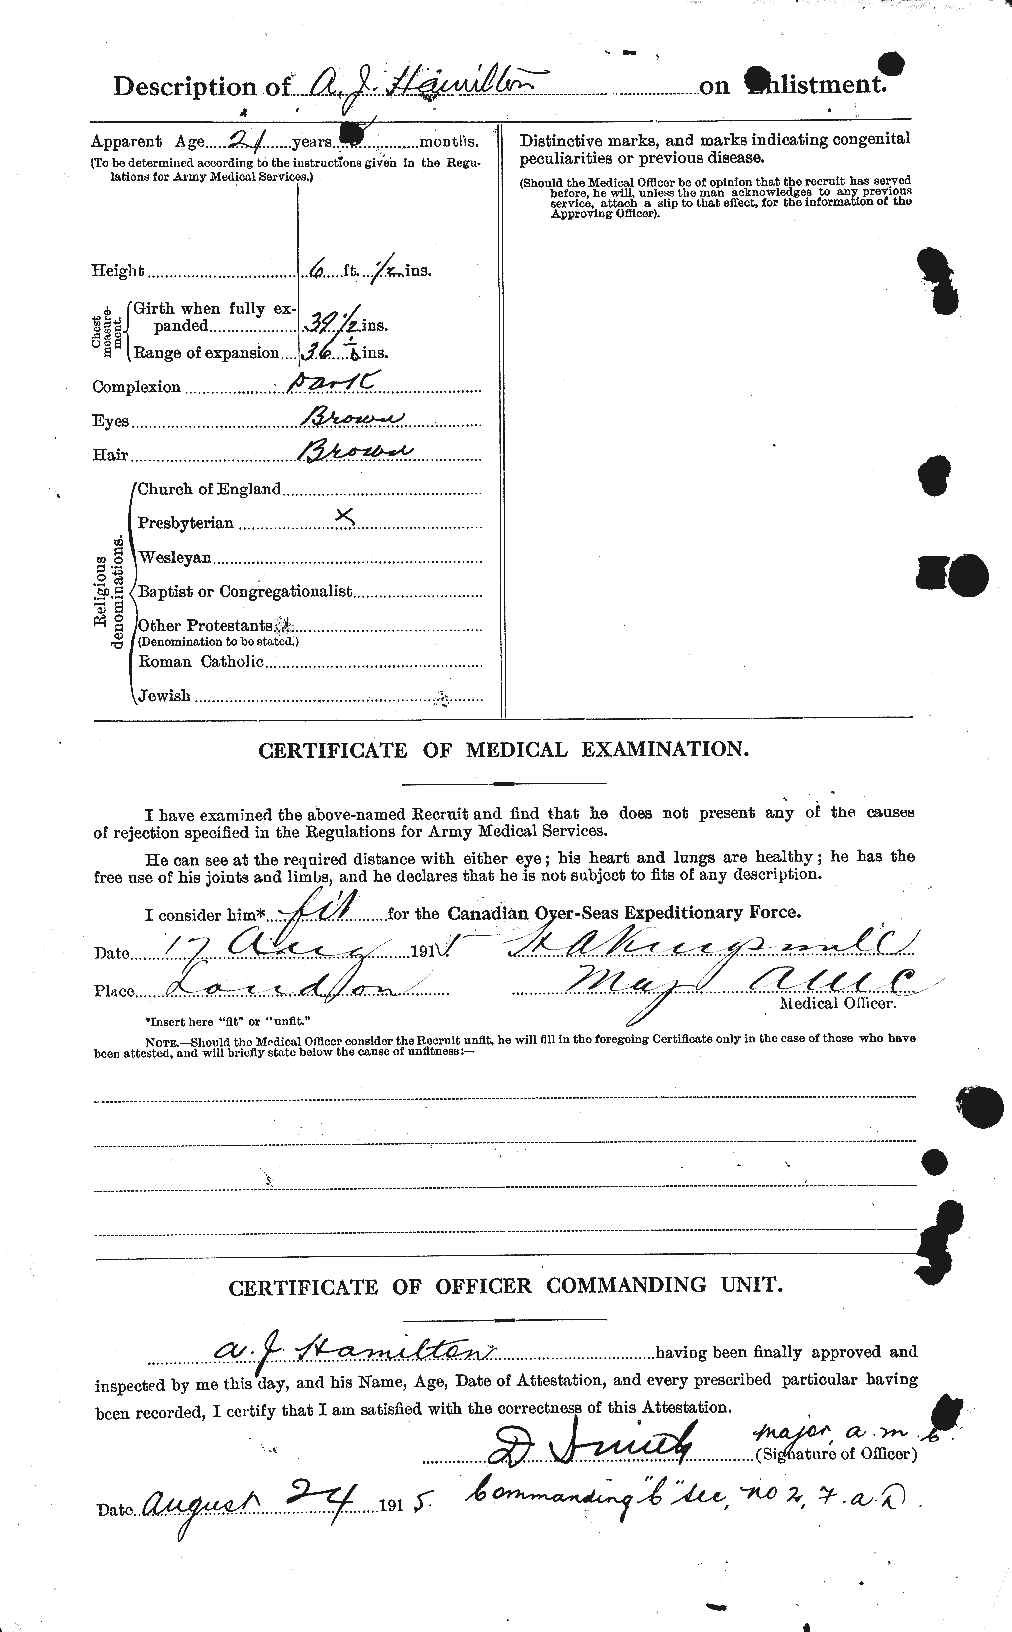 Personnel Records of the First World War - CEF 375177b